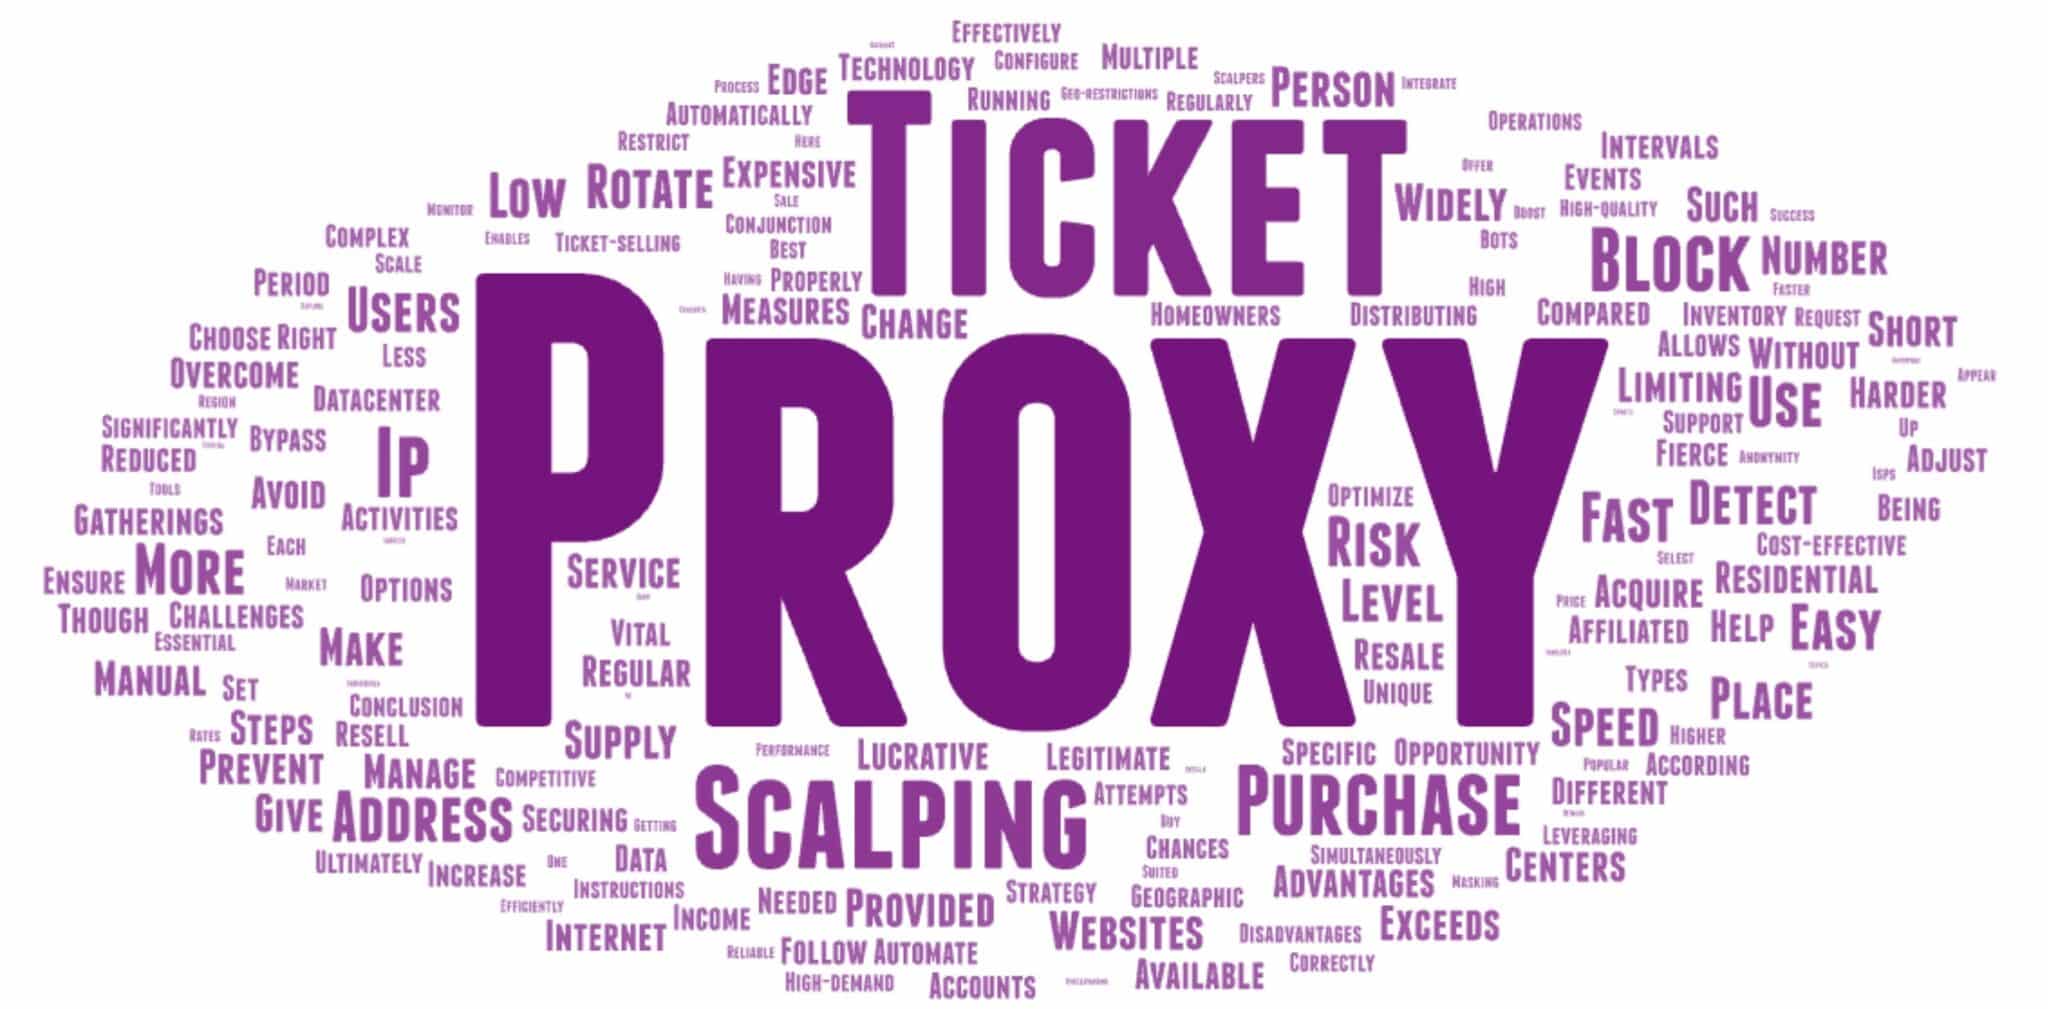 What Types of Proxies are Best Suited for Ticket Scalping, and How Can This Increase Your Income?